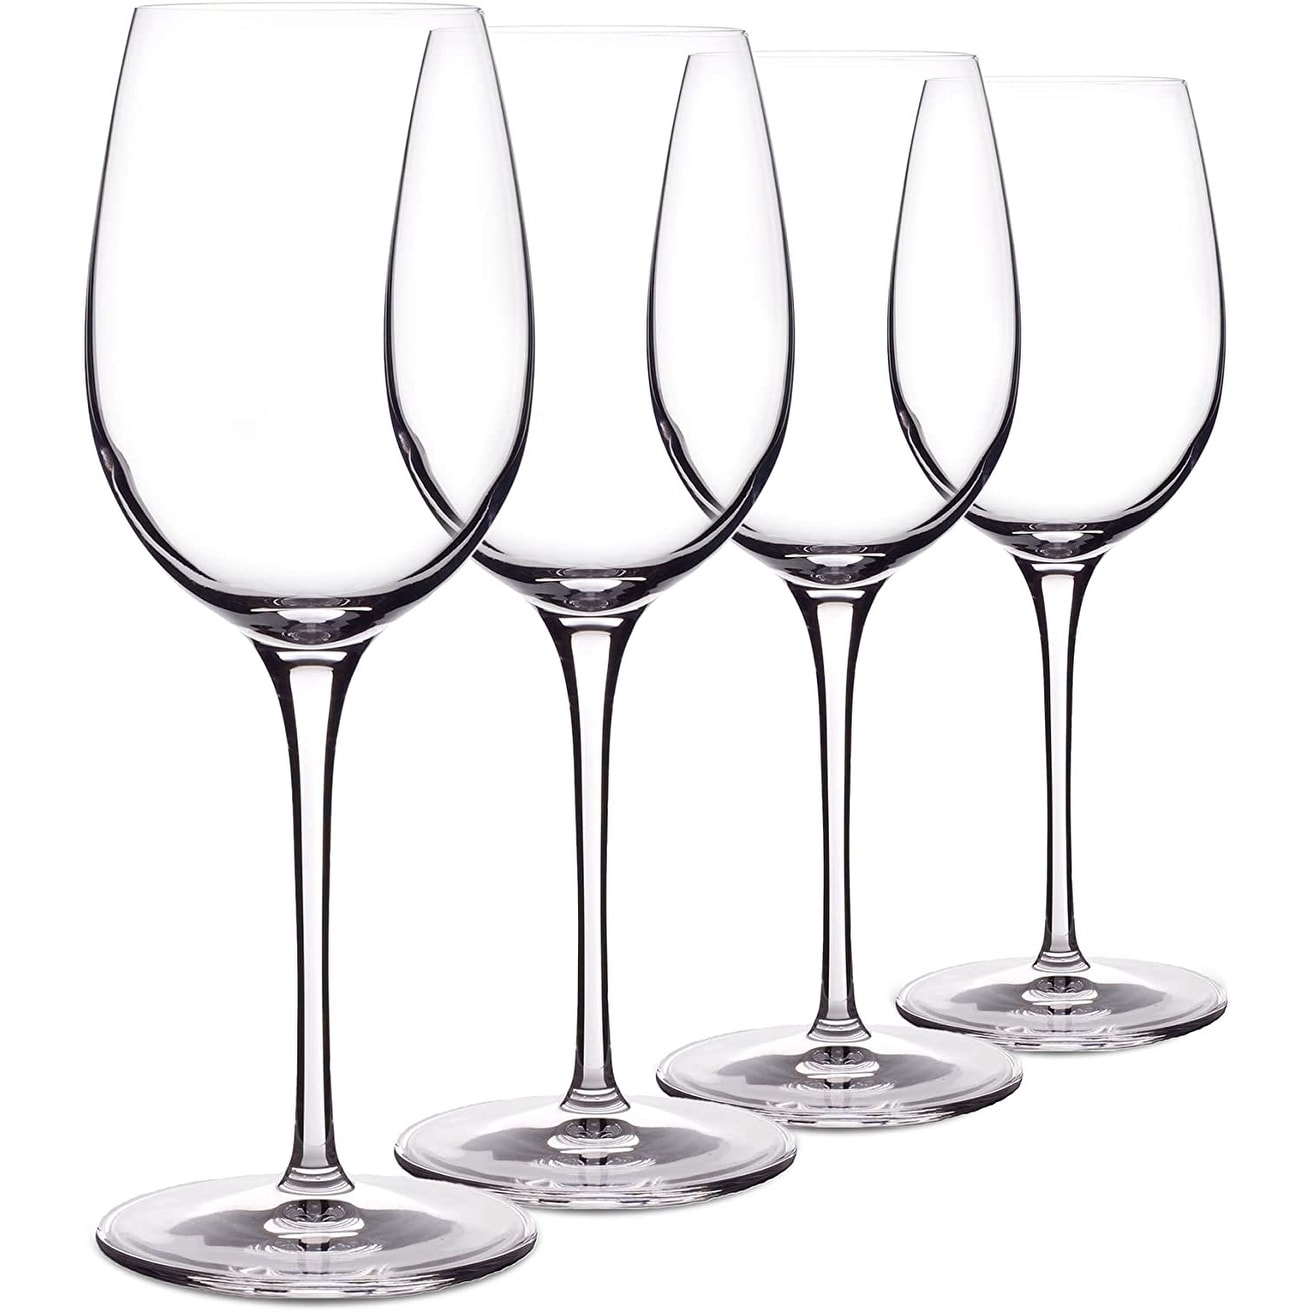 Schott Zwiesel Forte Tritan Crystal Stemware Collection Burgundy/Light Red  & White Wine Glasses, 1 Count (Pack of 1), Clear